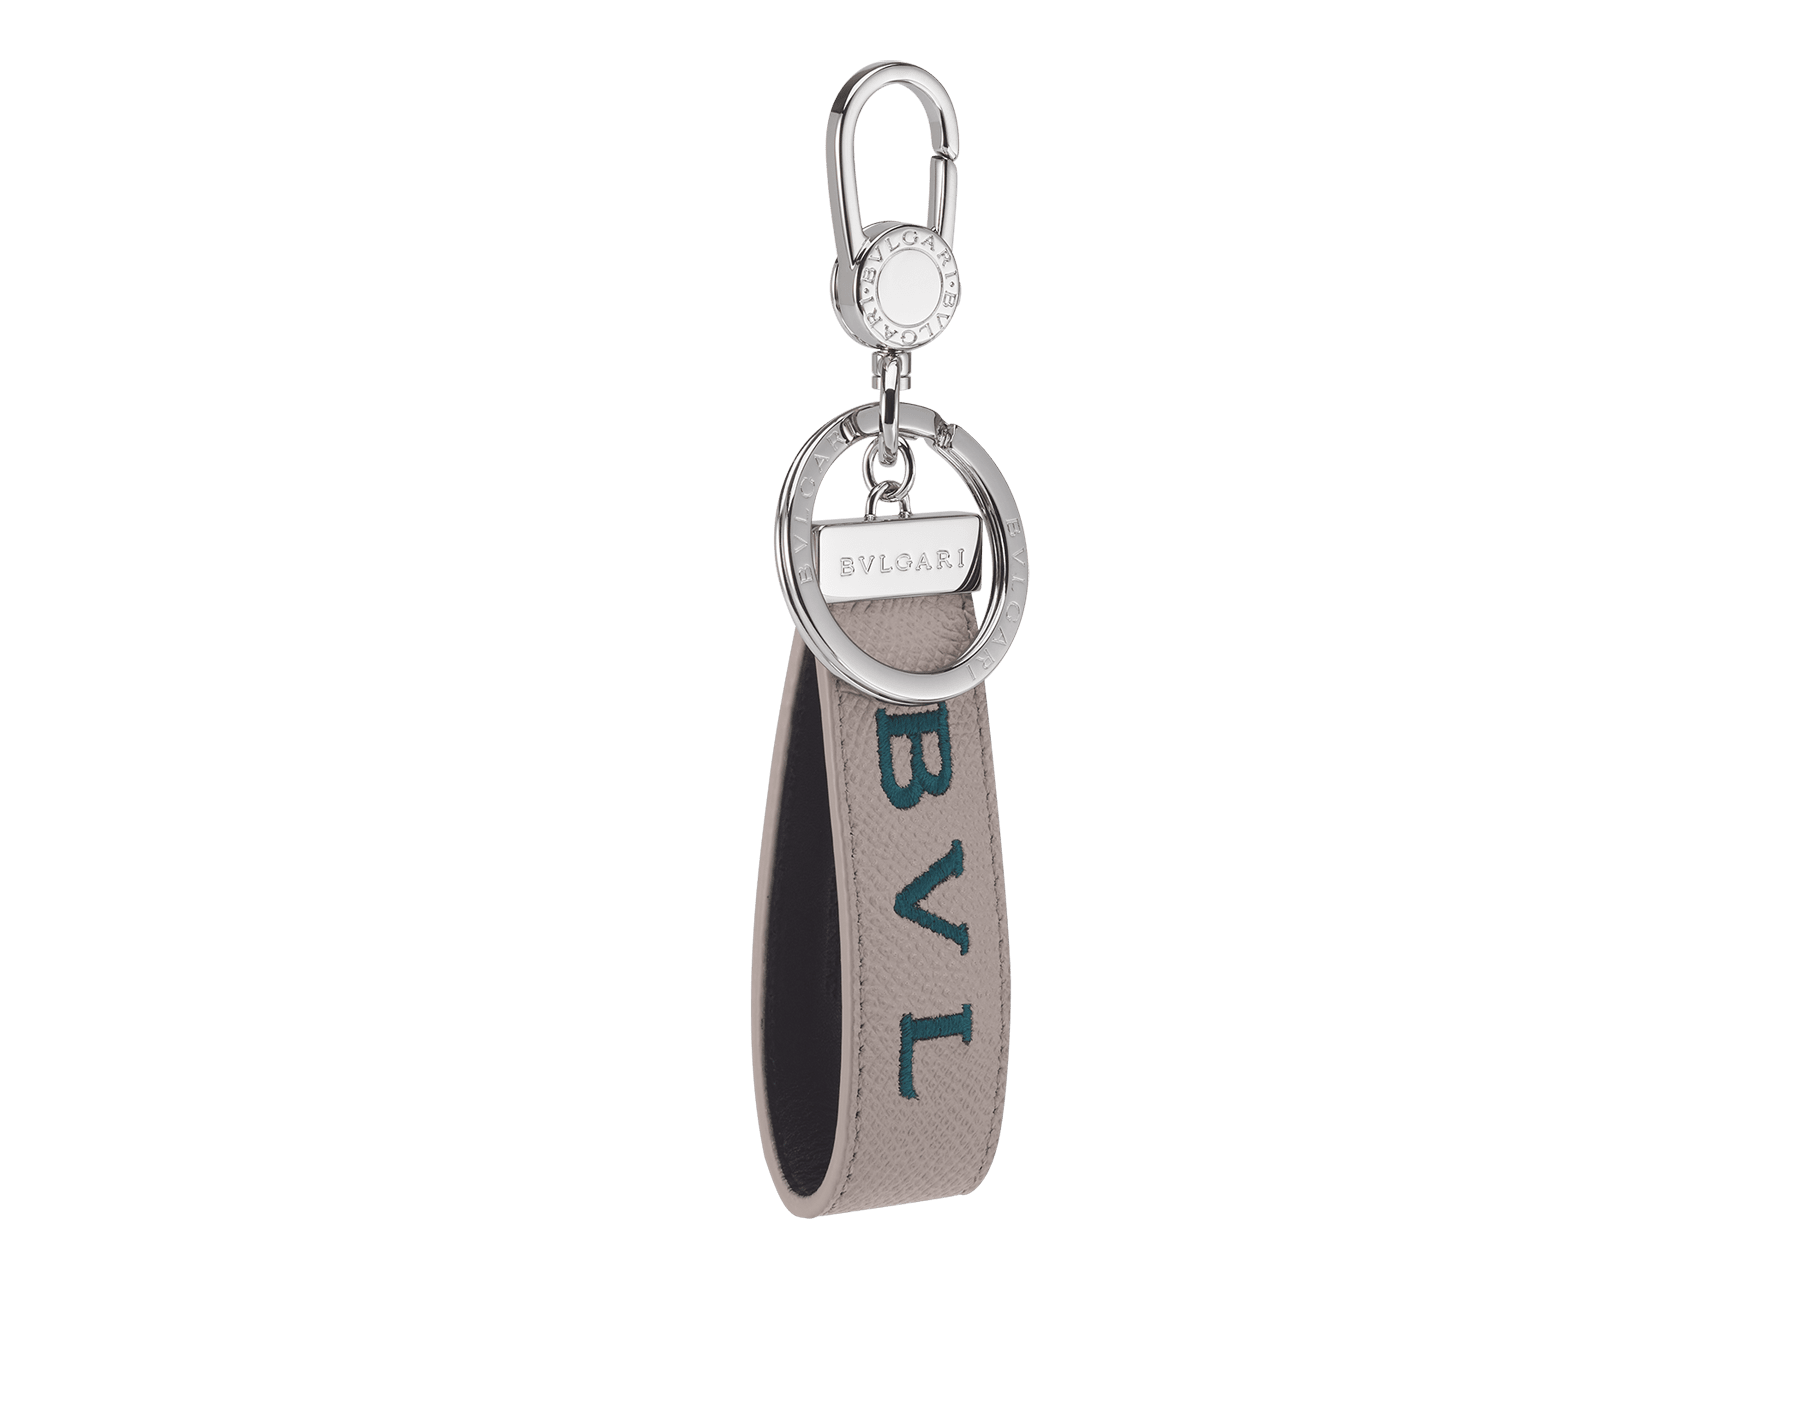 New "BVLGARI BVLGARI" keyring in Denim Sapphire blue grained calfskin with embroidered, light Aegean Topaz blue Bvlgari logo. Snap hook and ring in palladium-plated brass, and embellished with iconic logo. BBM-KEYRINGLOGOa image 1